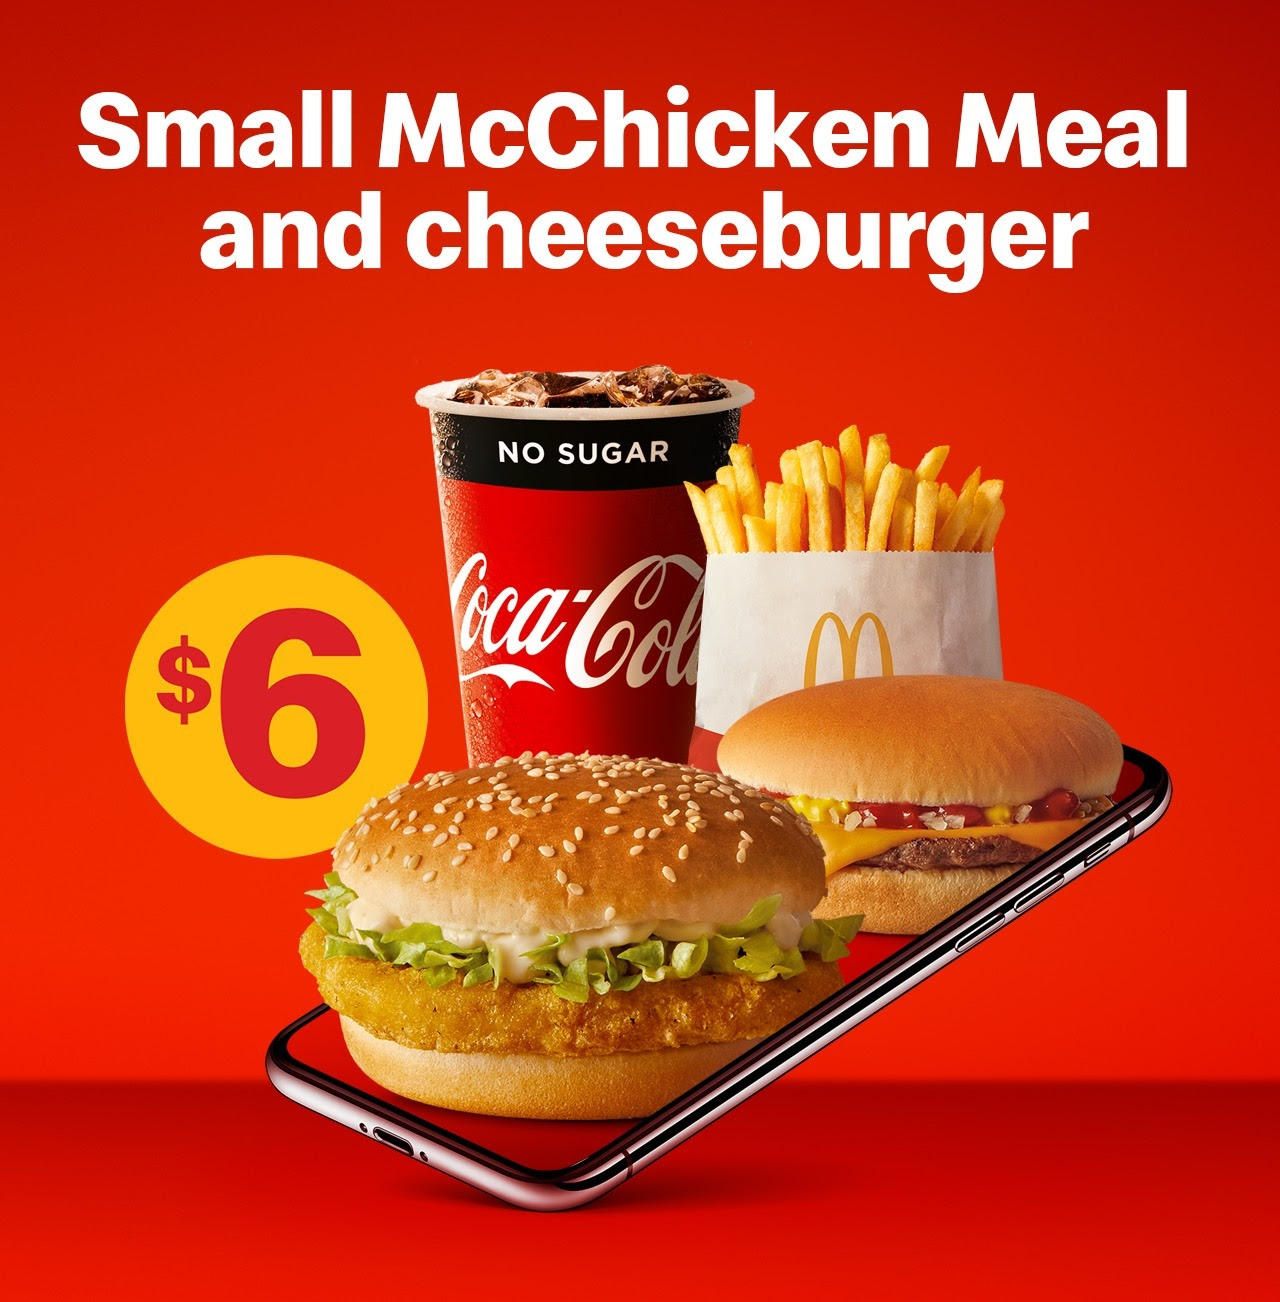 DEAL McDonald’s 6 Small McChicken Meal + Extra Cheeseburger with mymacca's App (until 21